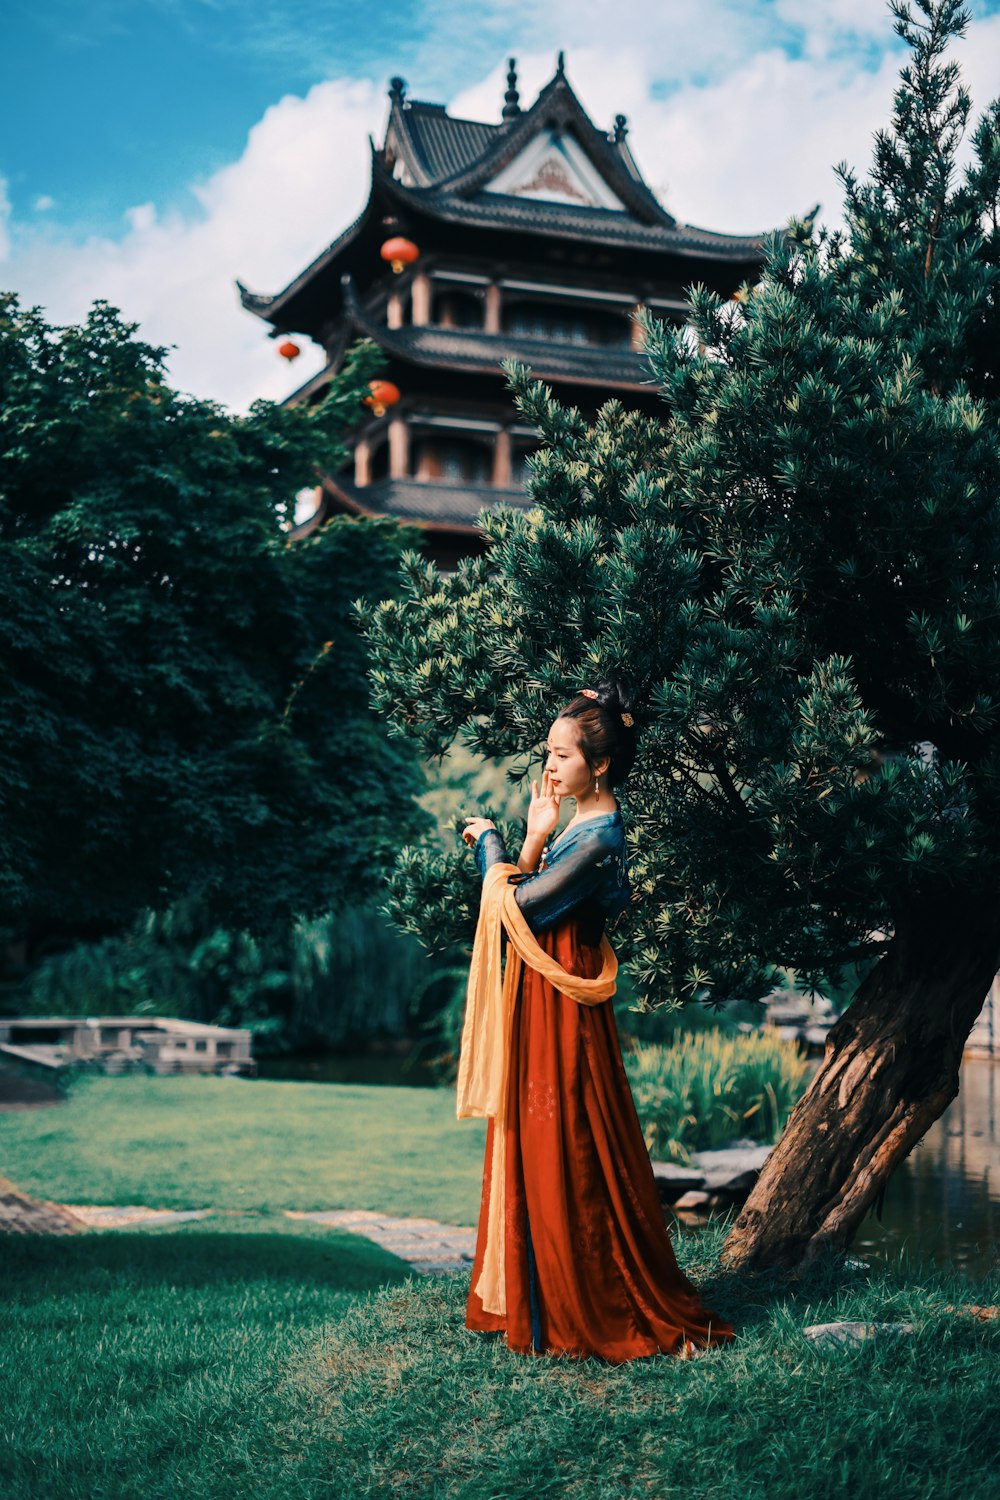 woman in orange dress standing near brown wooden house during daytime